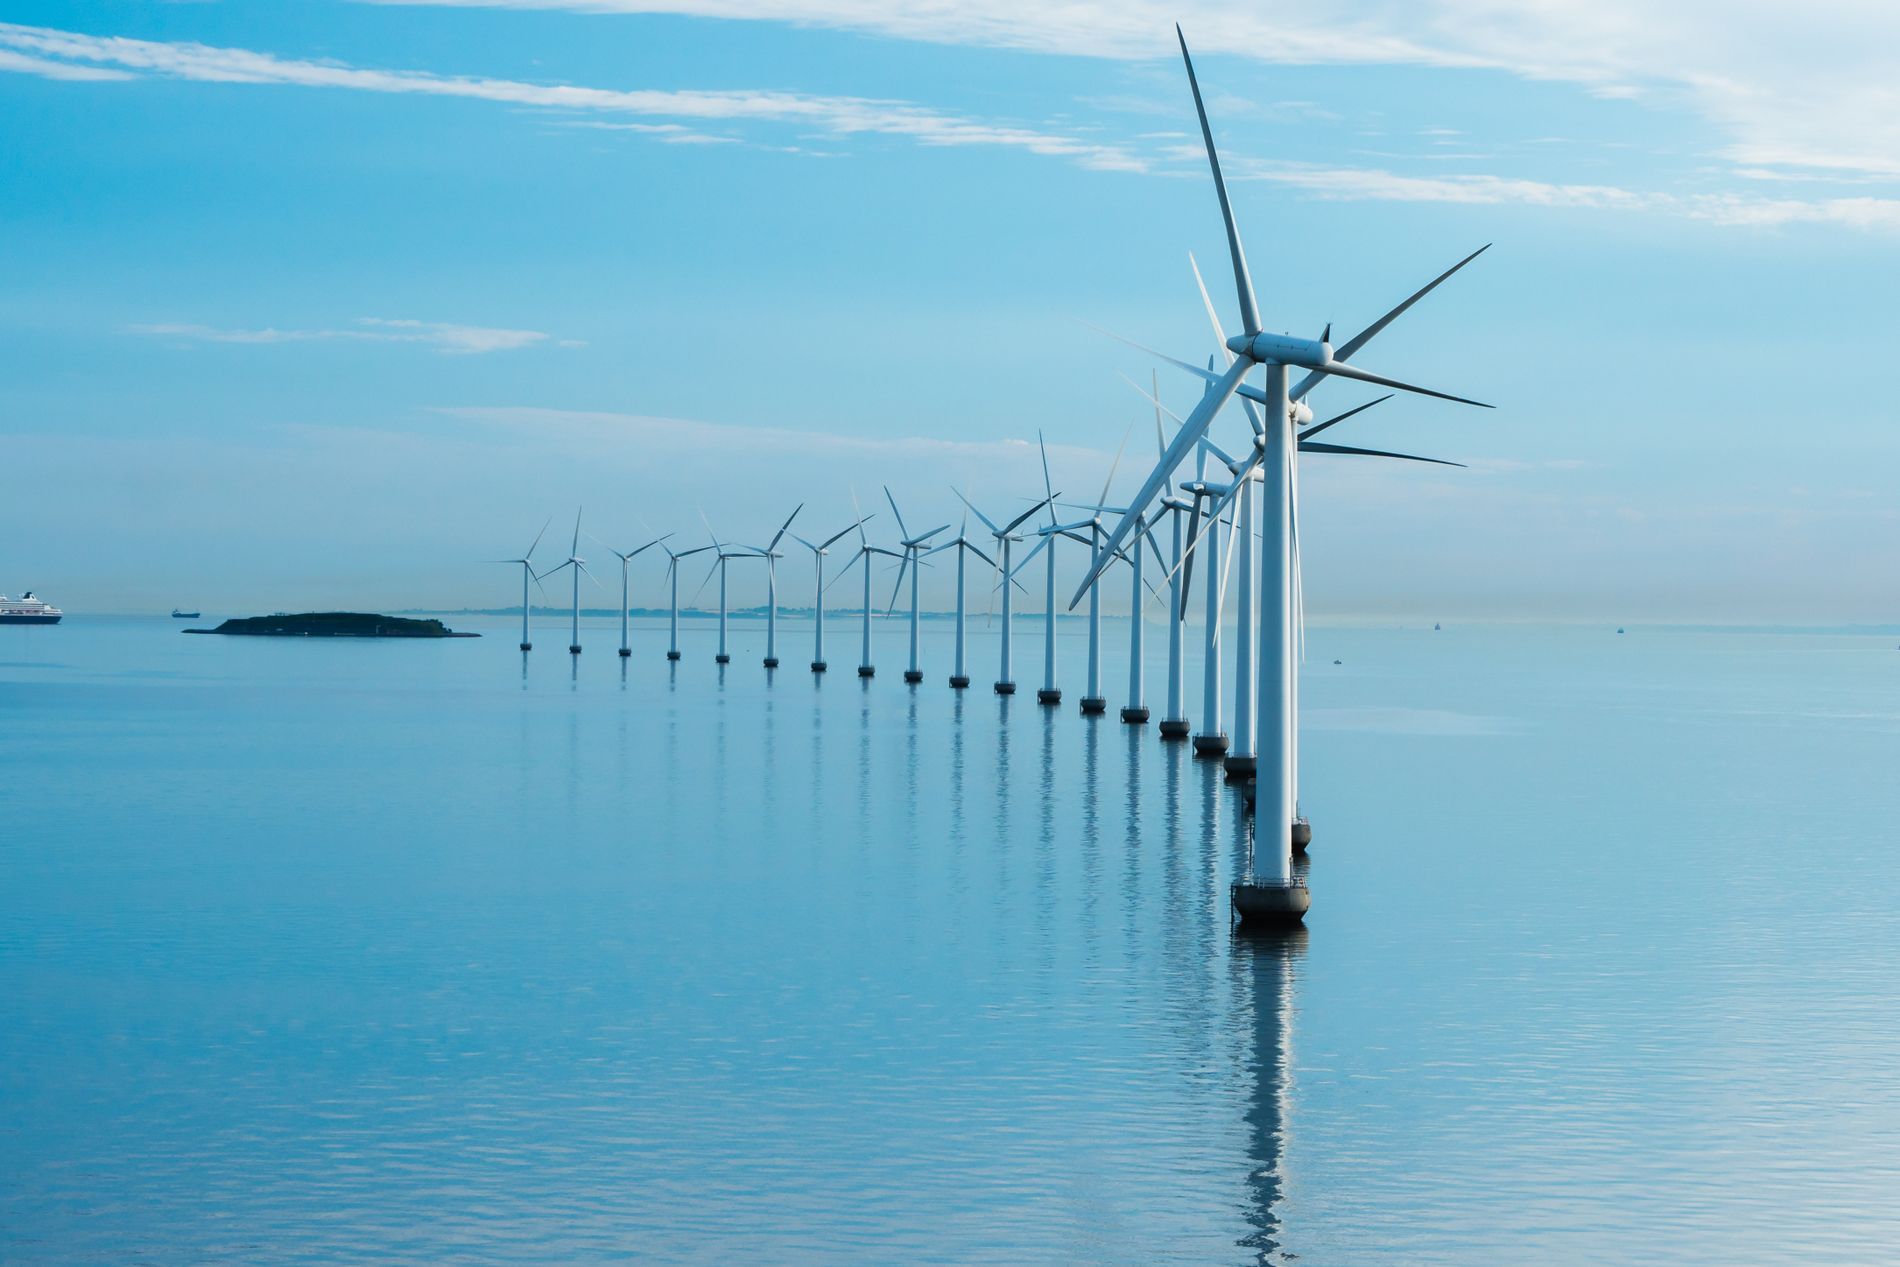 Virya Energy reaches an agreement to divest its offshore wind energy business to JERA